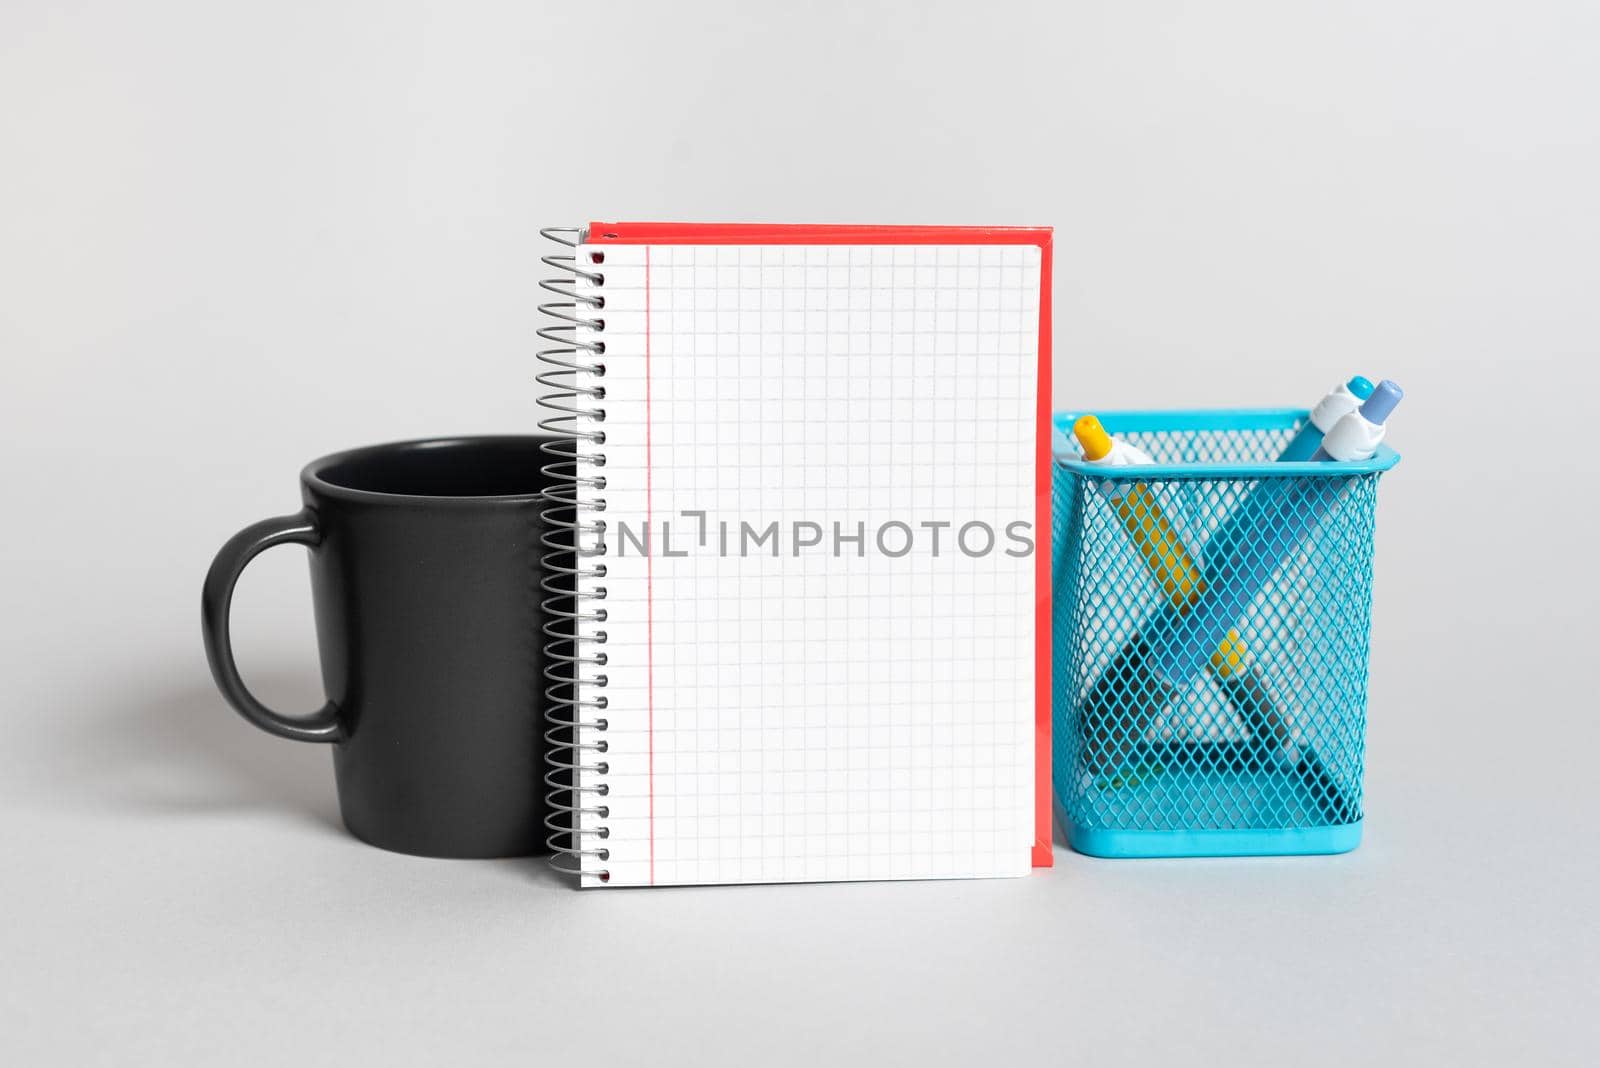 Cup, Notebook With Important Message And Pencil Case On Desk. Mug, Note With Crutial Information And Pens. Glass, Critical Announcement Written On Paper And Pencils. by nialowwa